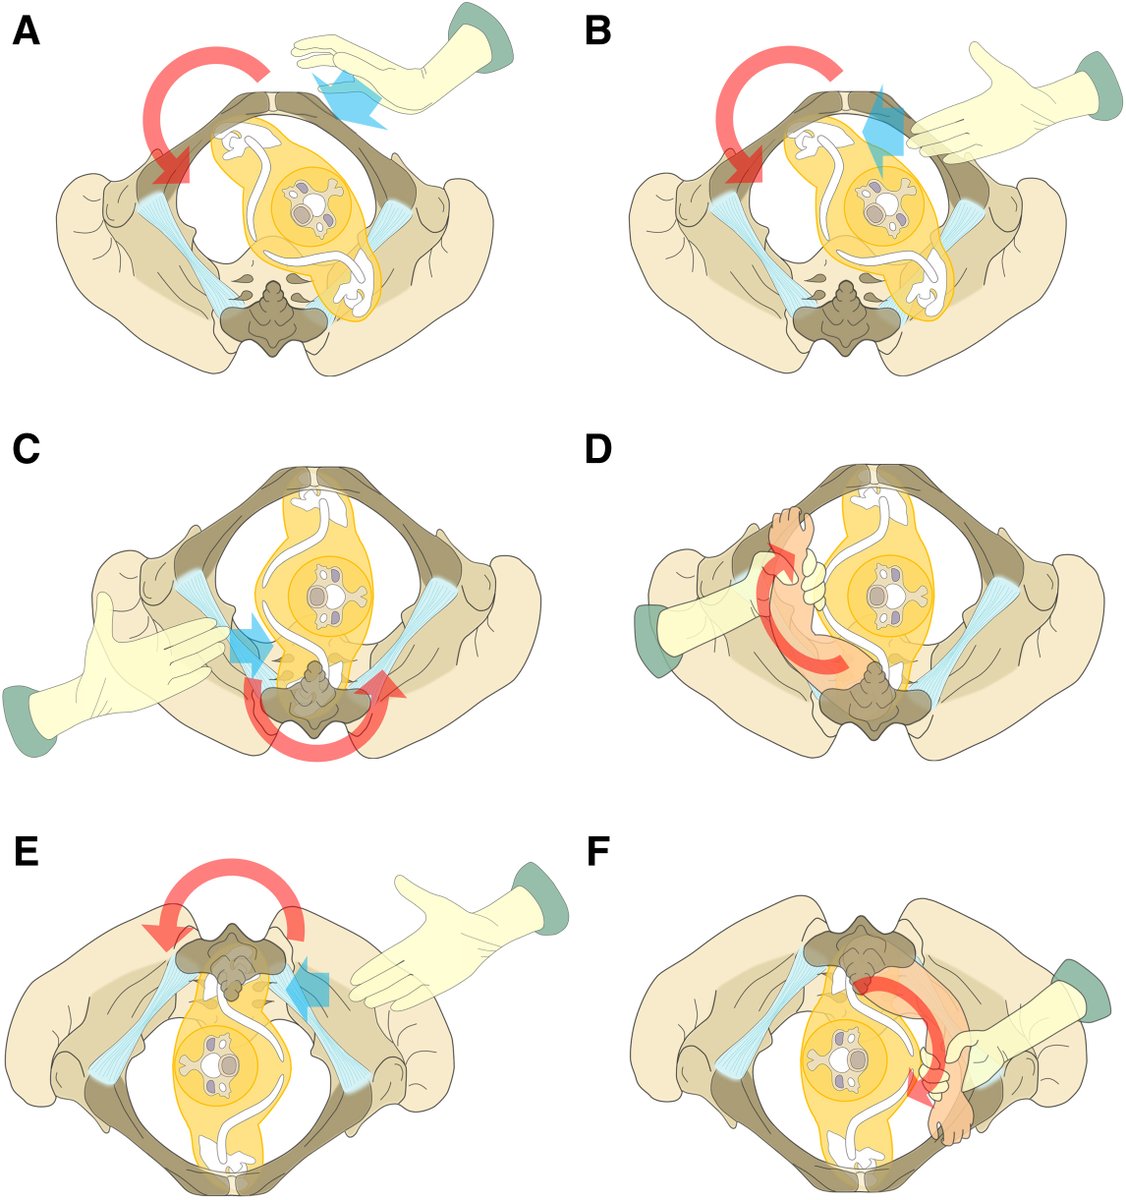 AJOG Expert Review in Labor: A critical evaluation of the external and internal maneuvers for resolution of shoulder dystocia - Approaches of the accoucheur’s hand in different maneuvers ow.ly/RLiV50RuyXy #obgyn